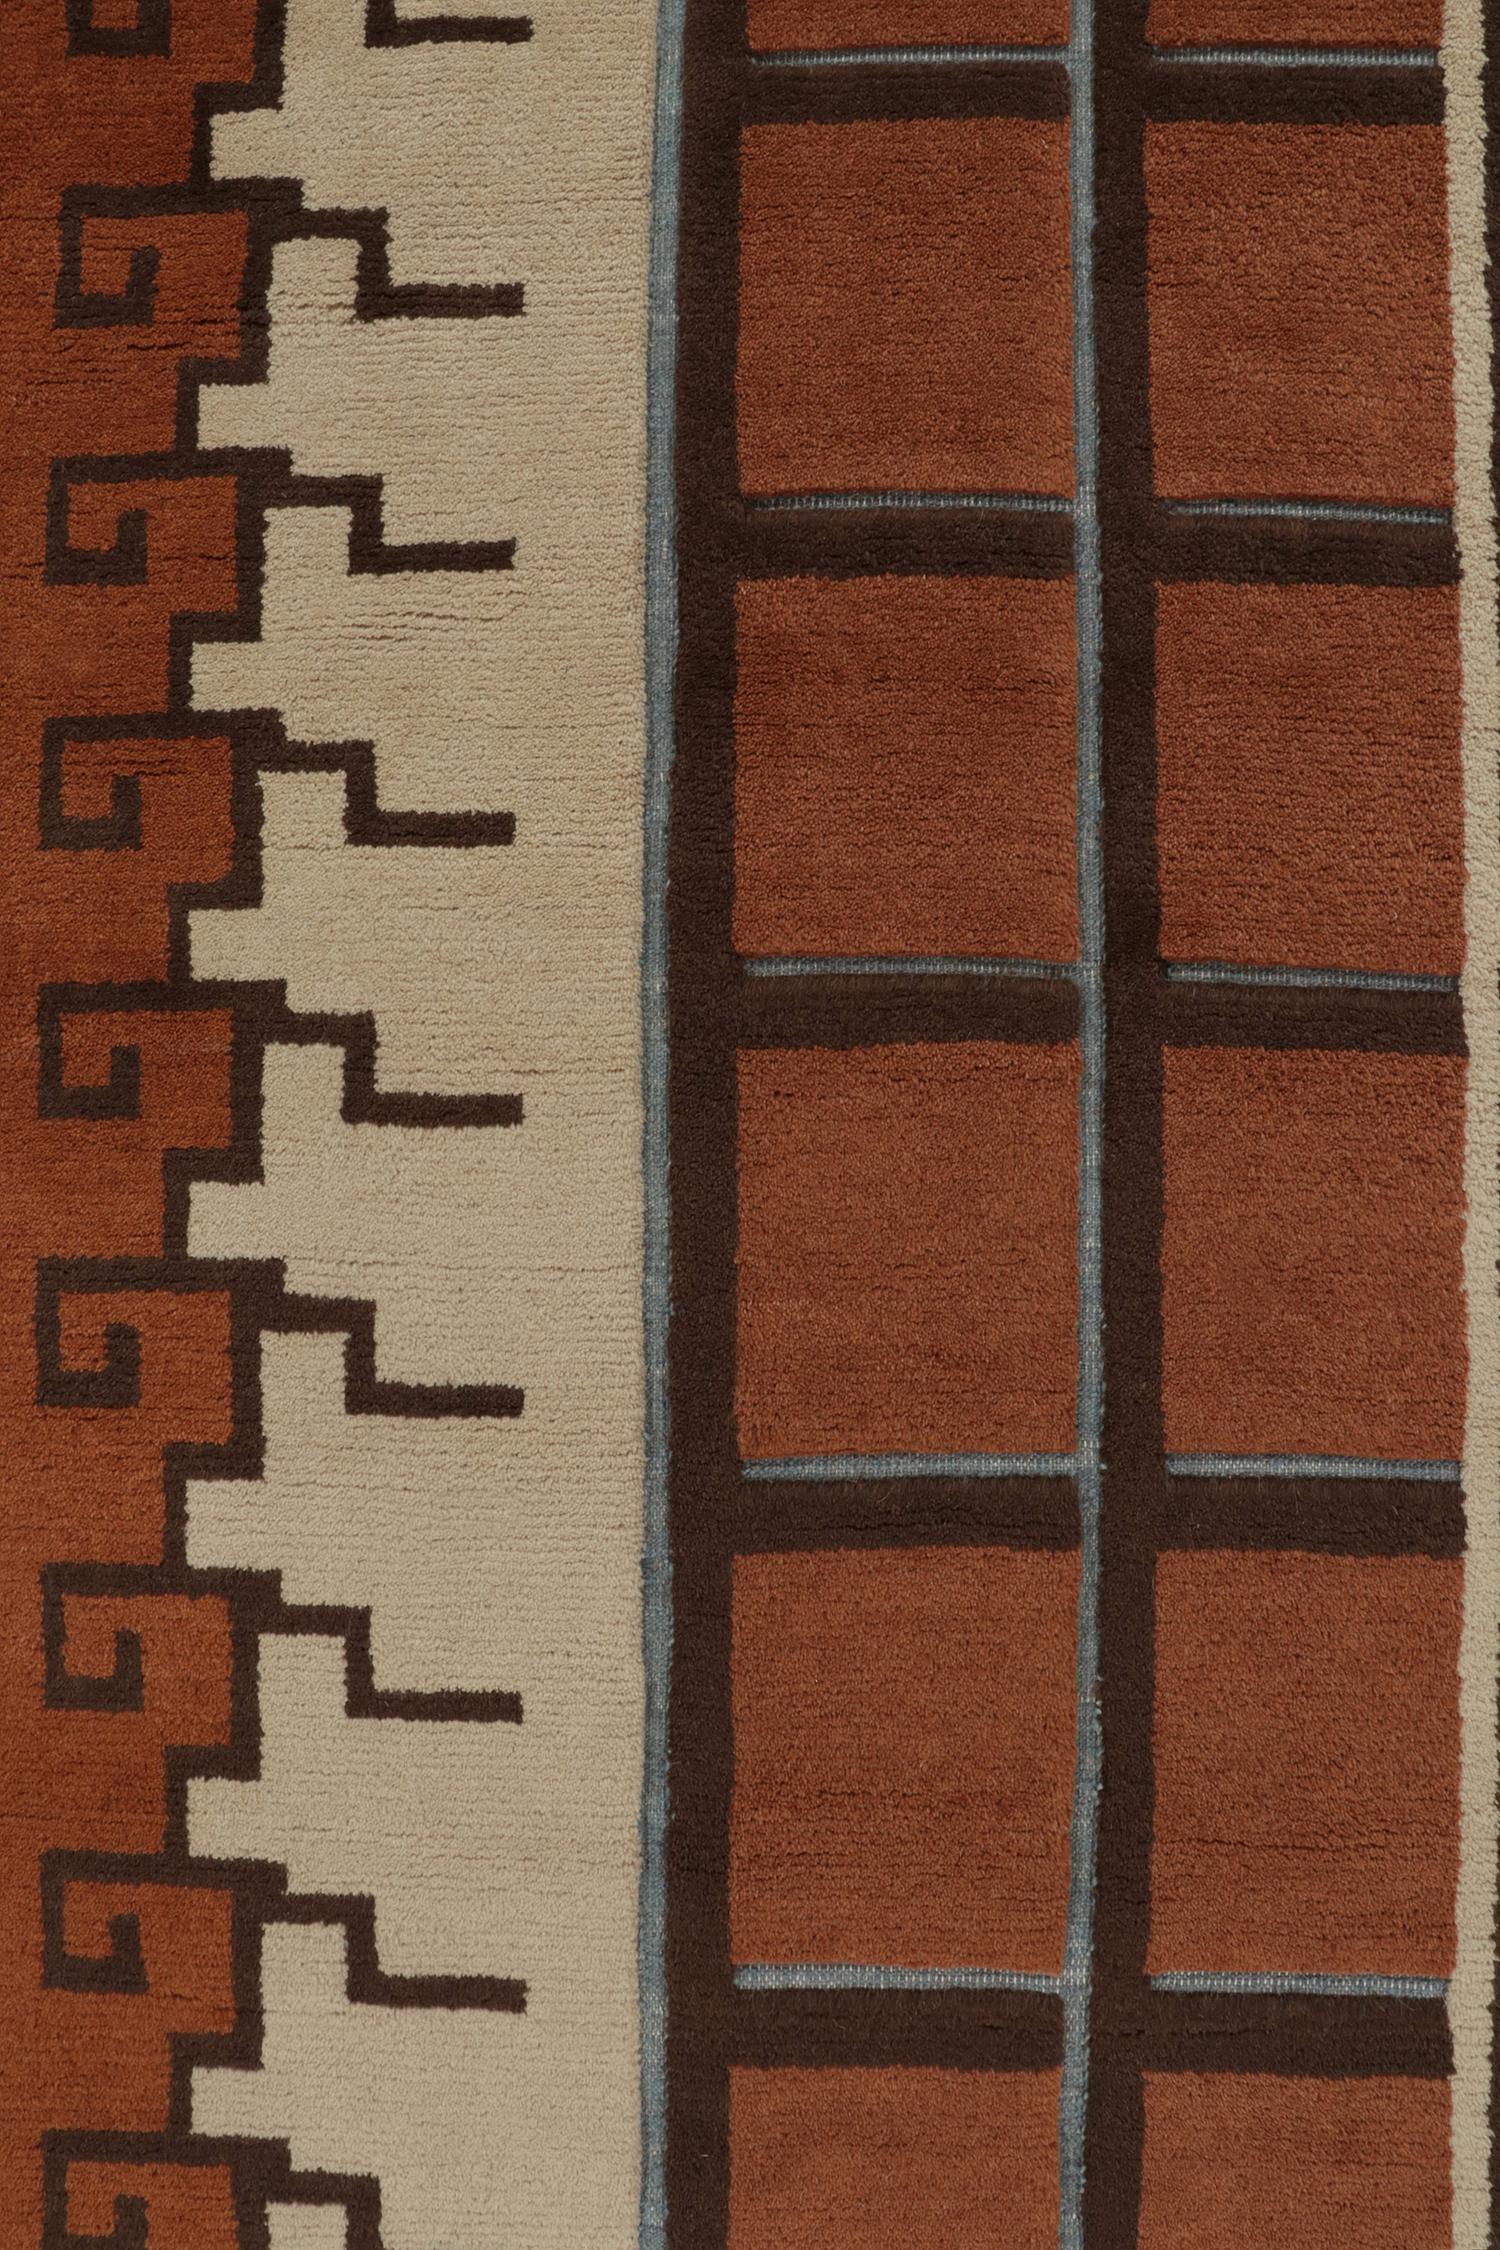 Rug & Kilim’s Swedish Deco Style Rug in Rust-Orange, Beige-Brown & Blue Patterns In New Condition For Sale In Long Island City, NY